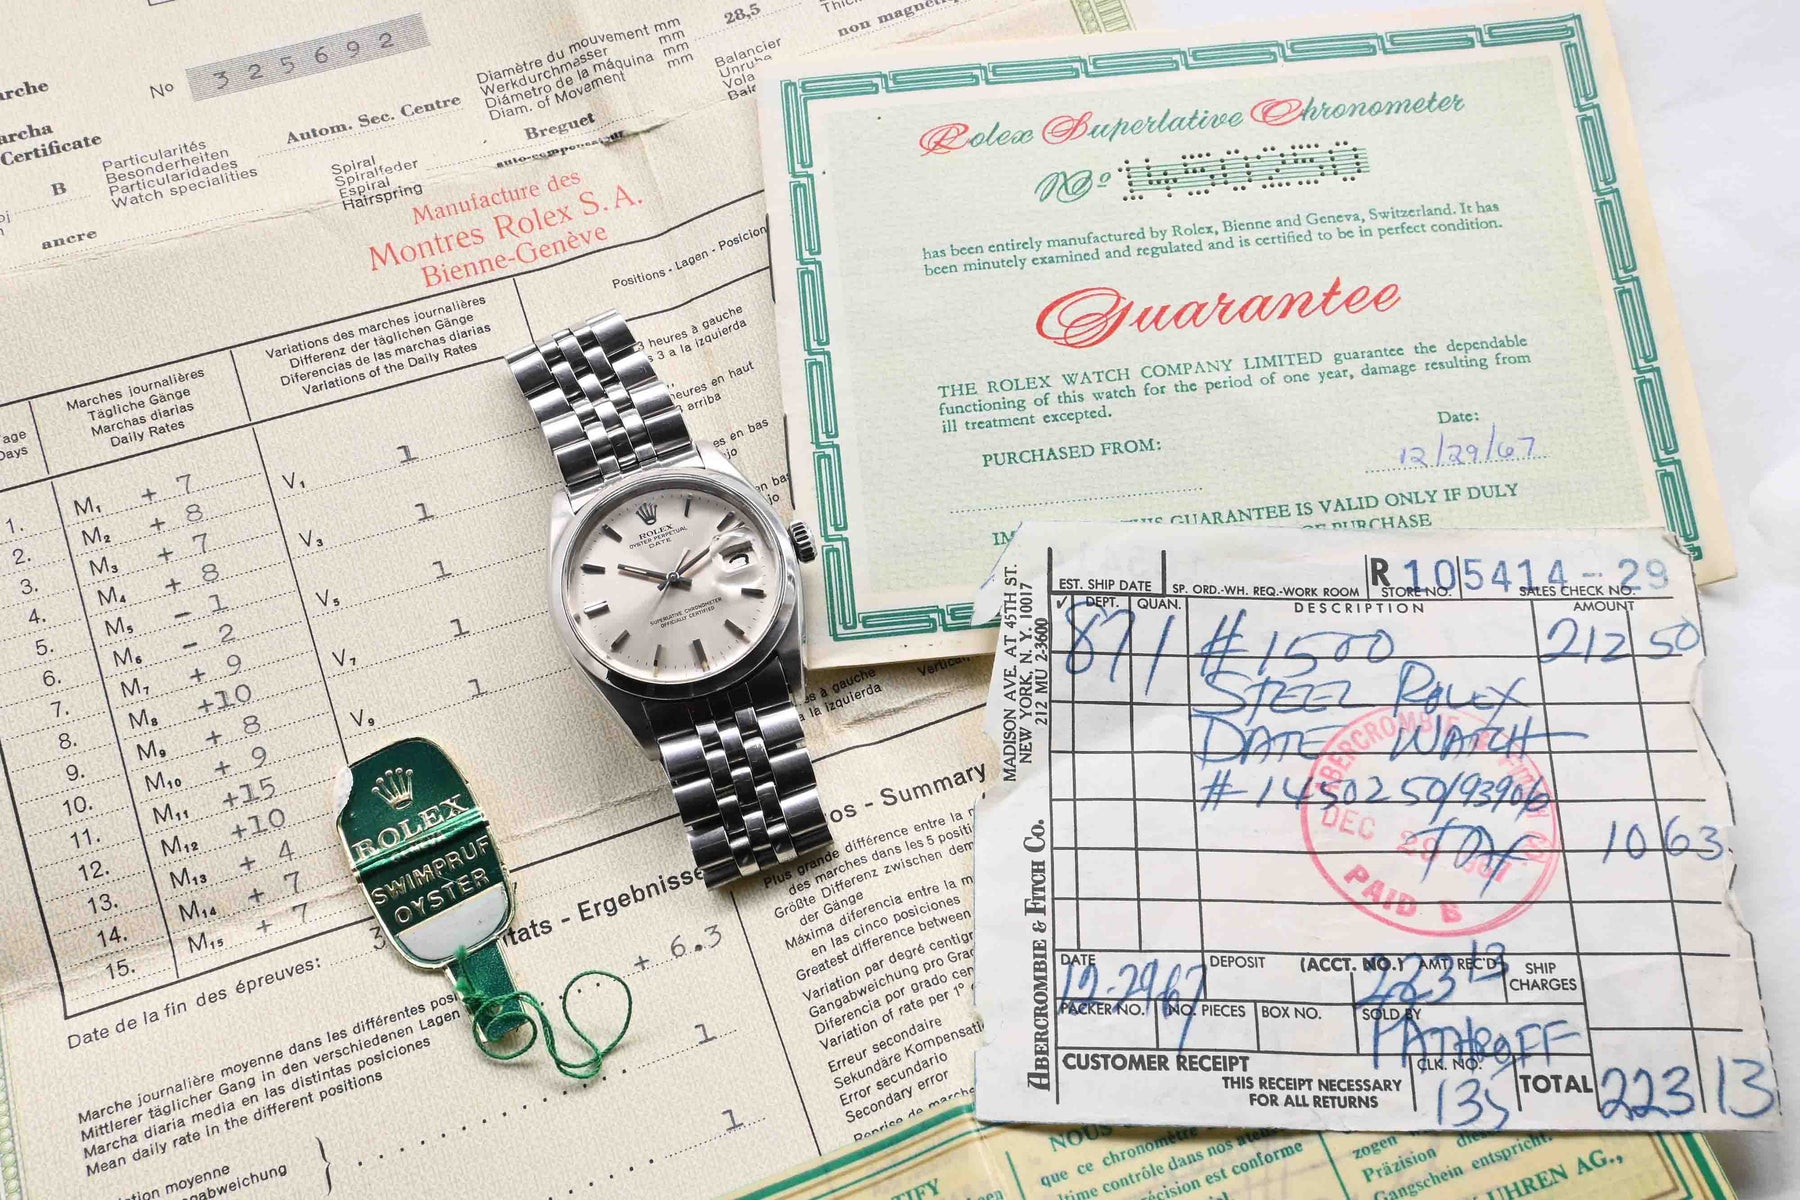 1967 Rolex Date Ref. 1500 (with Warranty and Invoice from Abercrombie & Fitch)